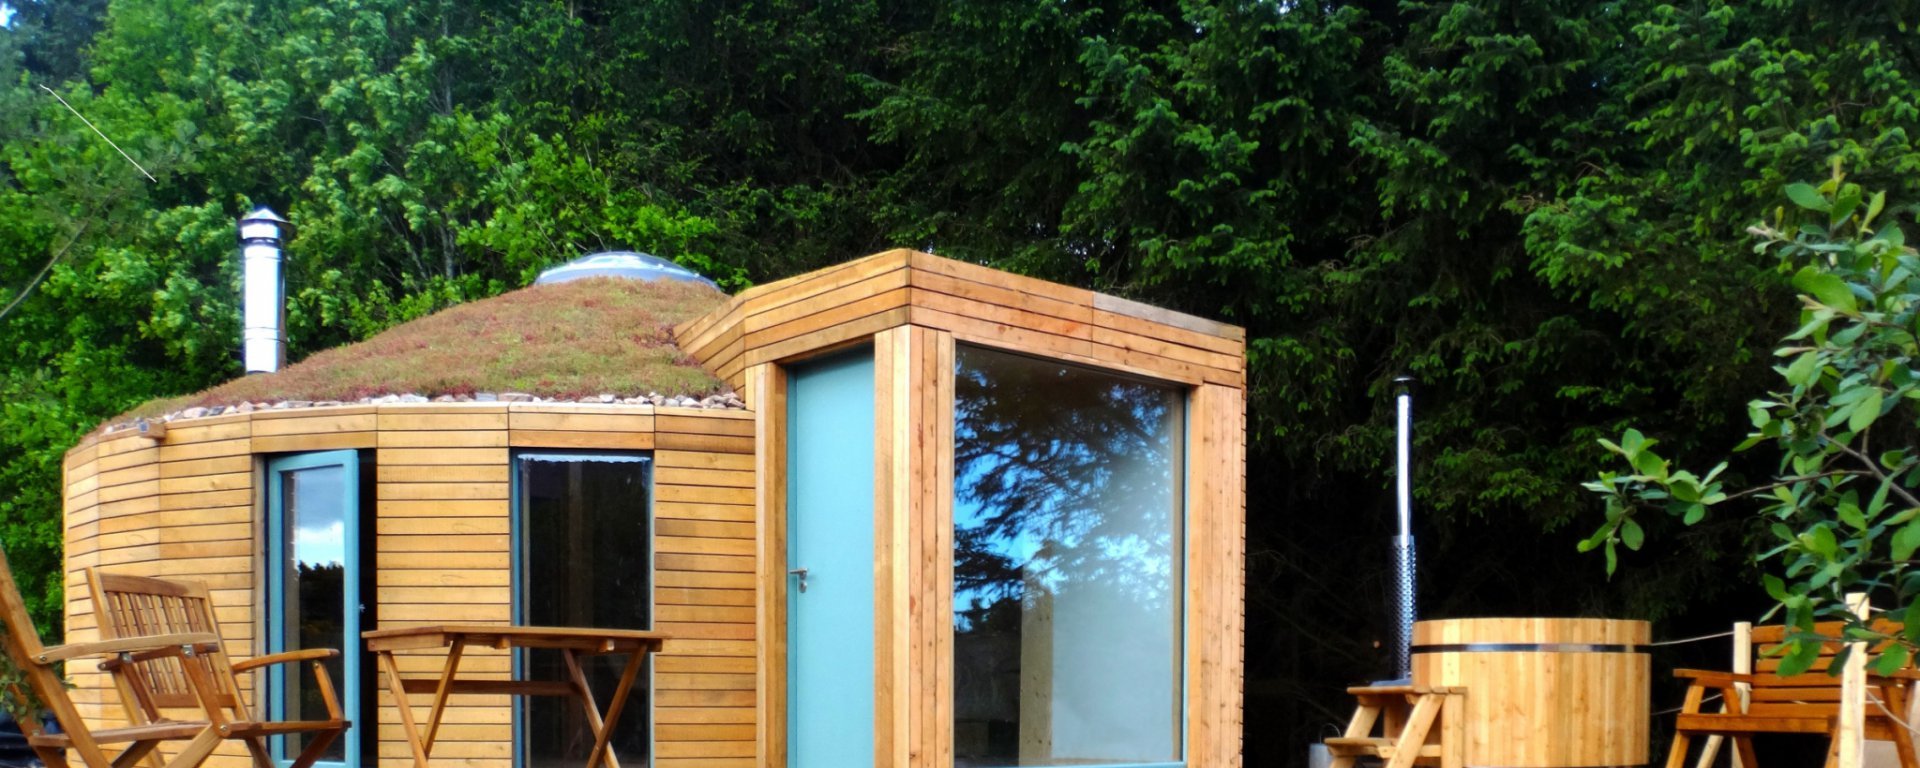 An image showing the exterior of Otter Yurt Lodge at Loch Ken Eco Bothies self catering accommodatio